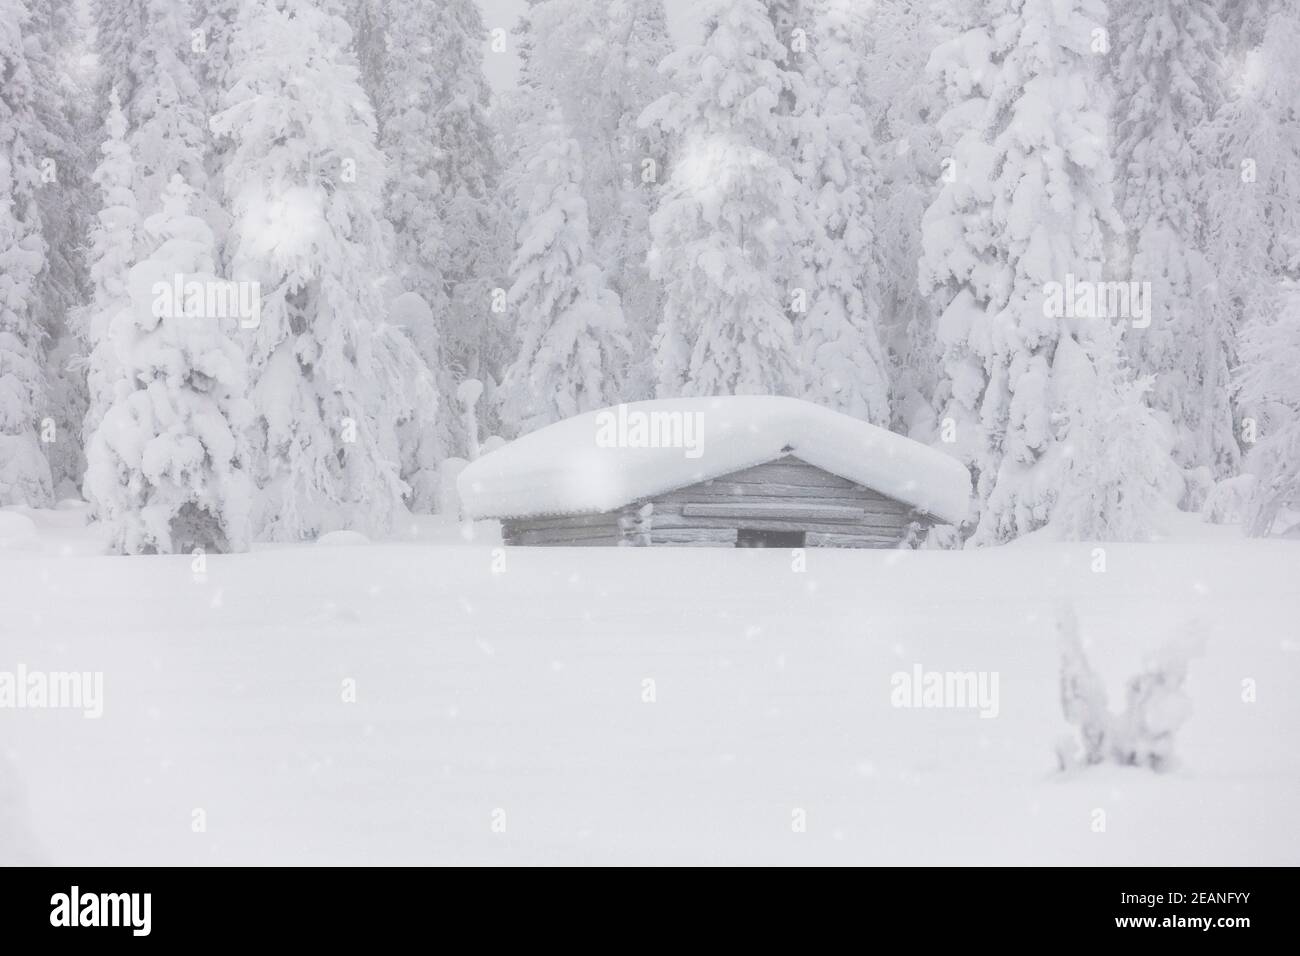 Snowflakes falling over wooden hut and trees in the Arctic forest covered with snow, Lapland, Finland, Europe Stock Photo